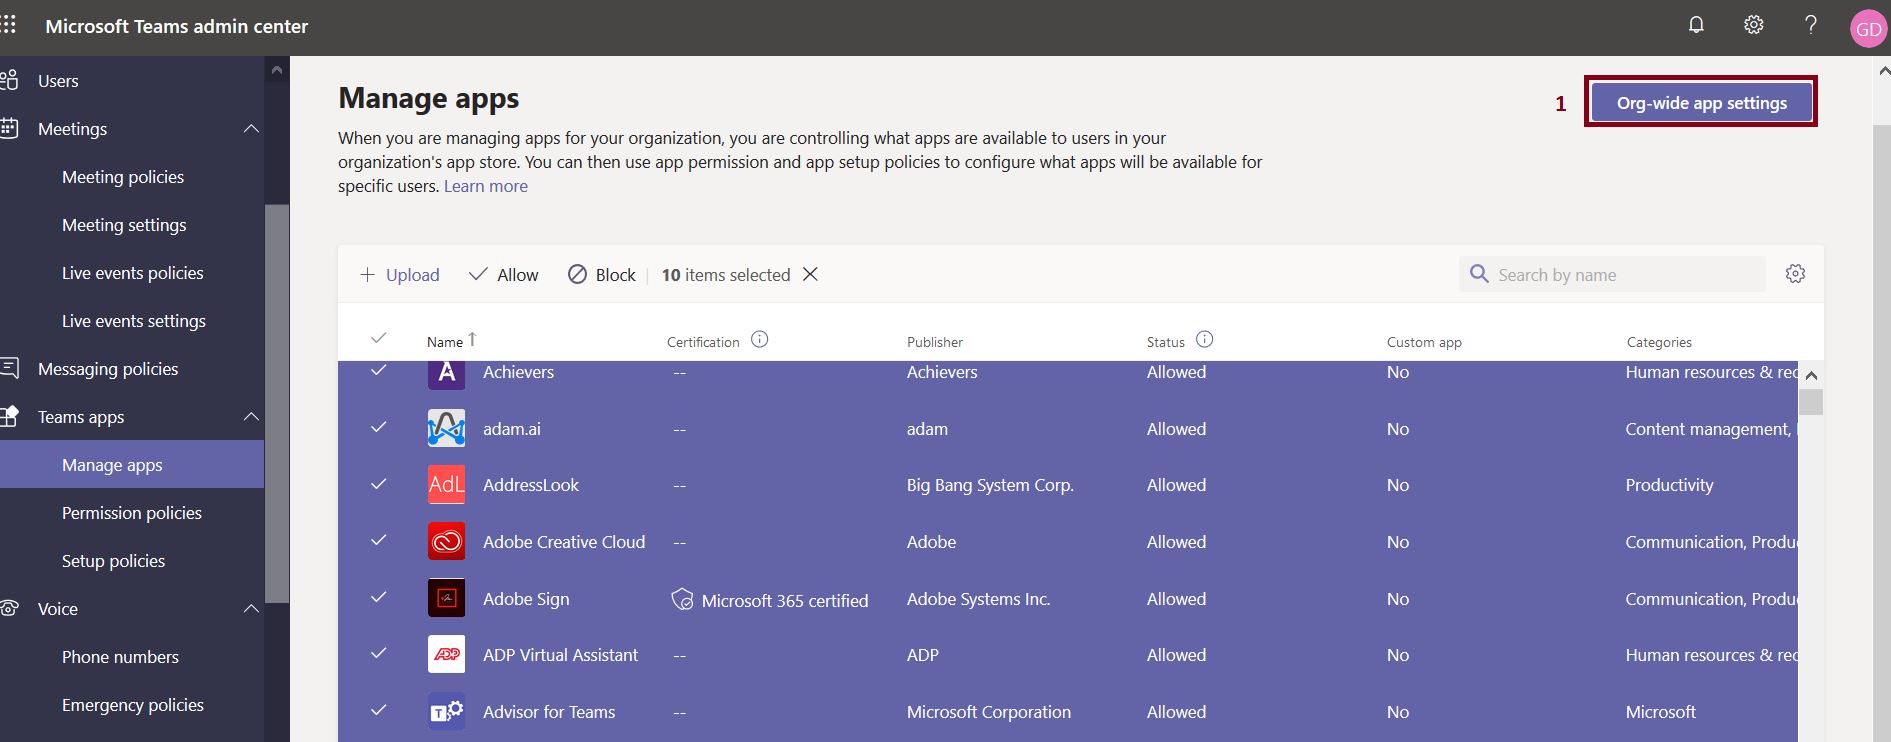 How to configure the Org-wide app settings - Manage apps in Microsoft Teams